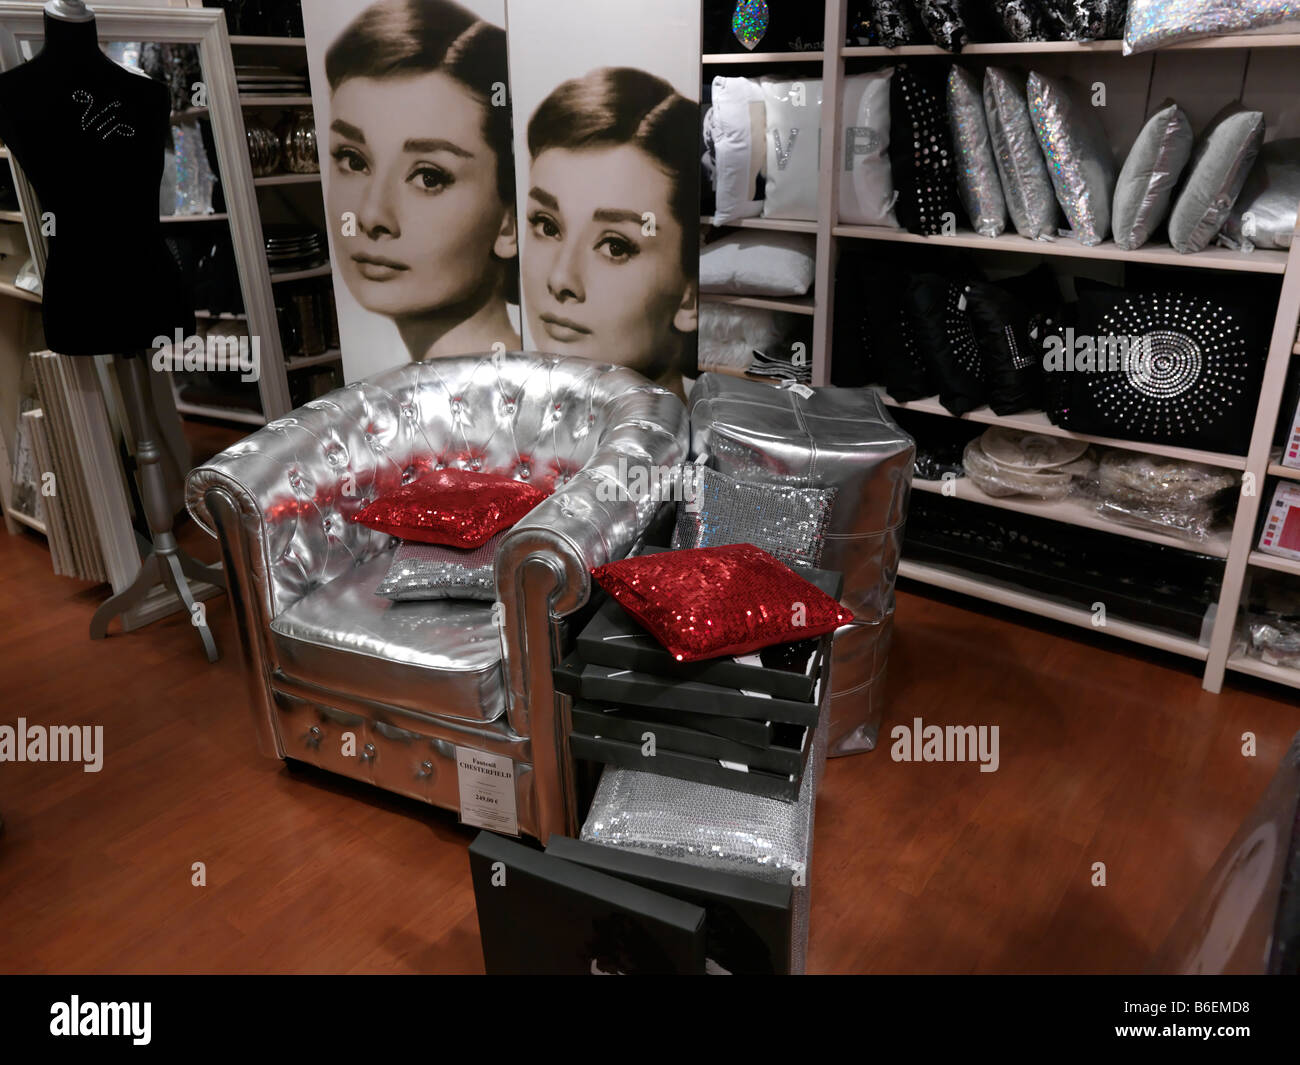 Cite Europe Coquelles France Soft Furnishing Shop Silver Chair and Audrey Hepburn Picture Stock Photo